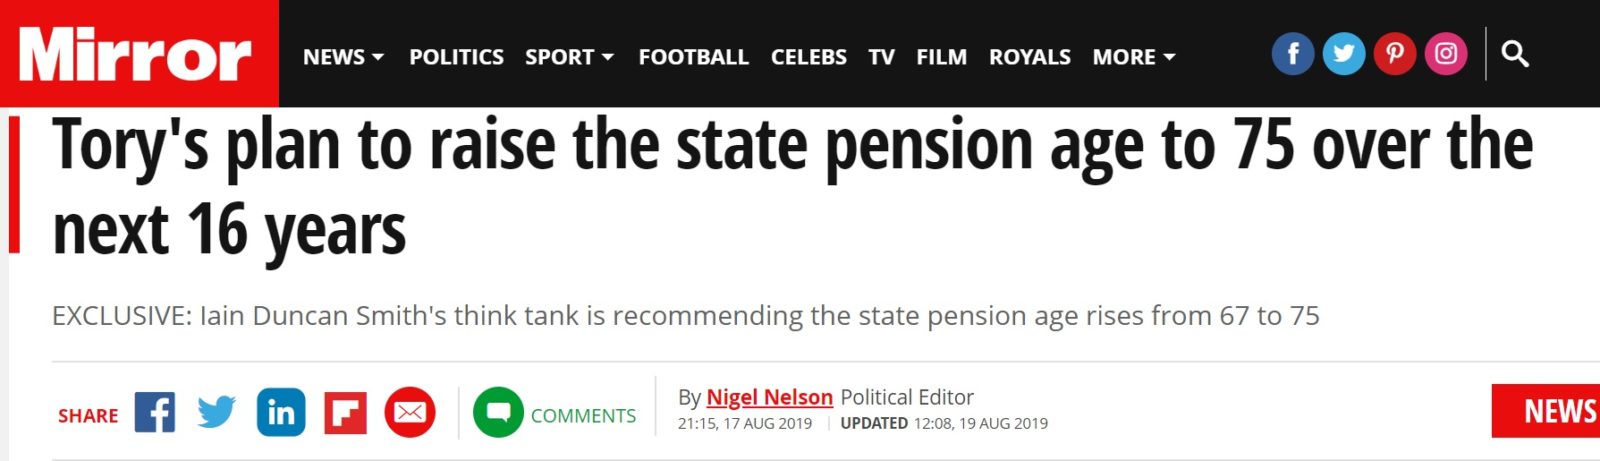 The state pension age is set to rise